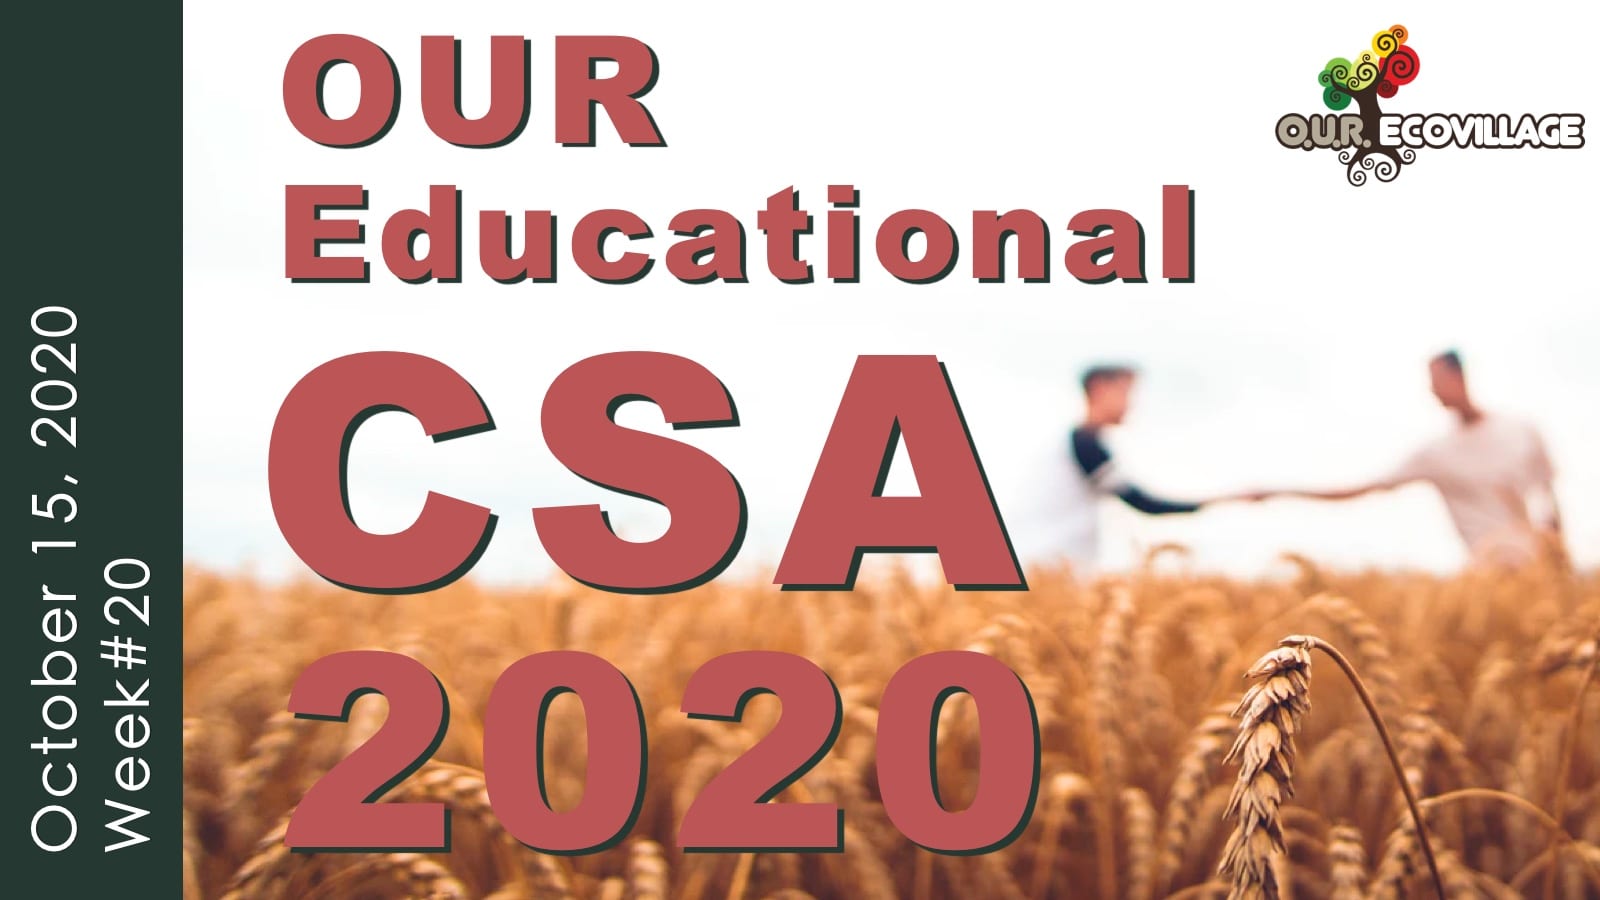 OUR Educational CSA Week #20